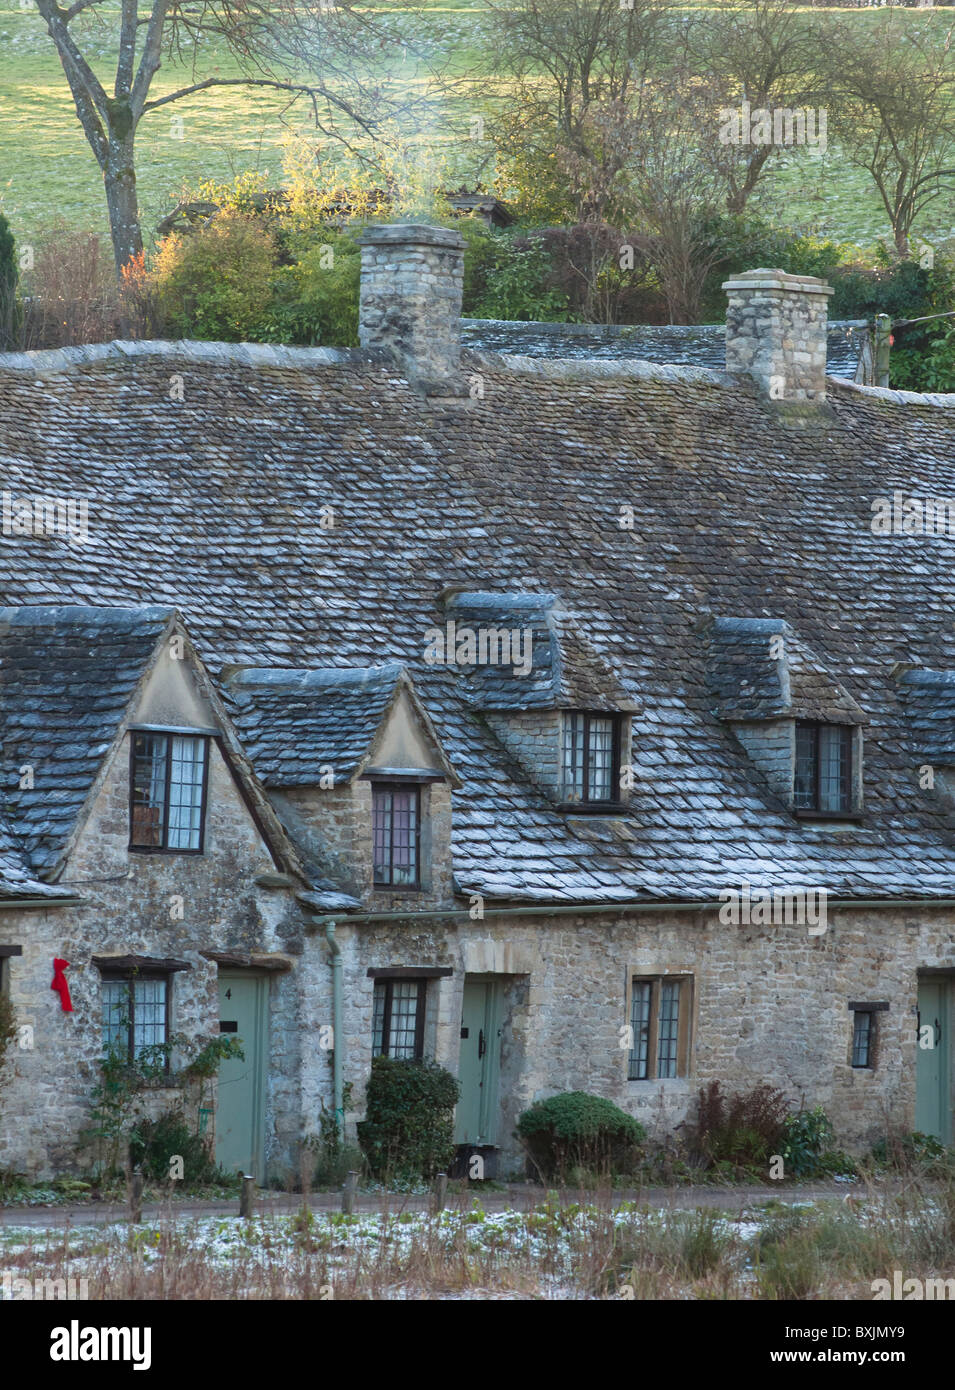 Arlington Row - 17th century weavers cottages, built in Cotswold stone, in the picturesque village of Bibury, Gloucestershire UK Stock Photo